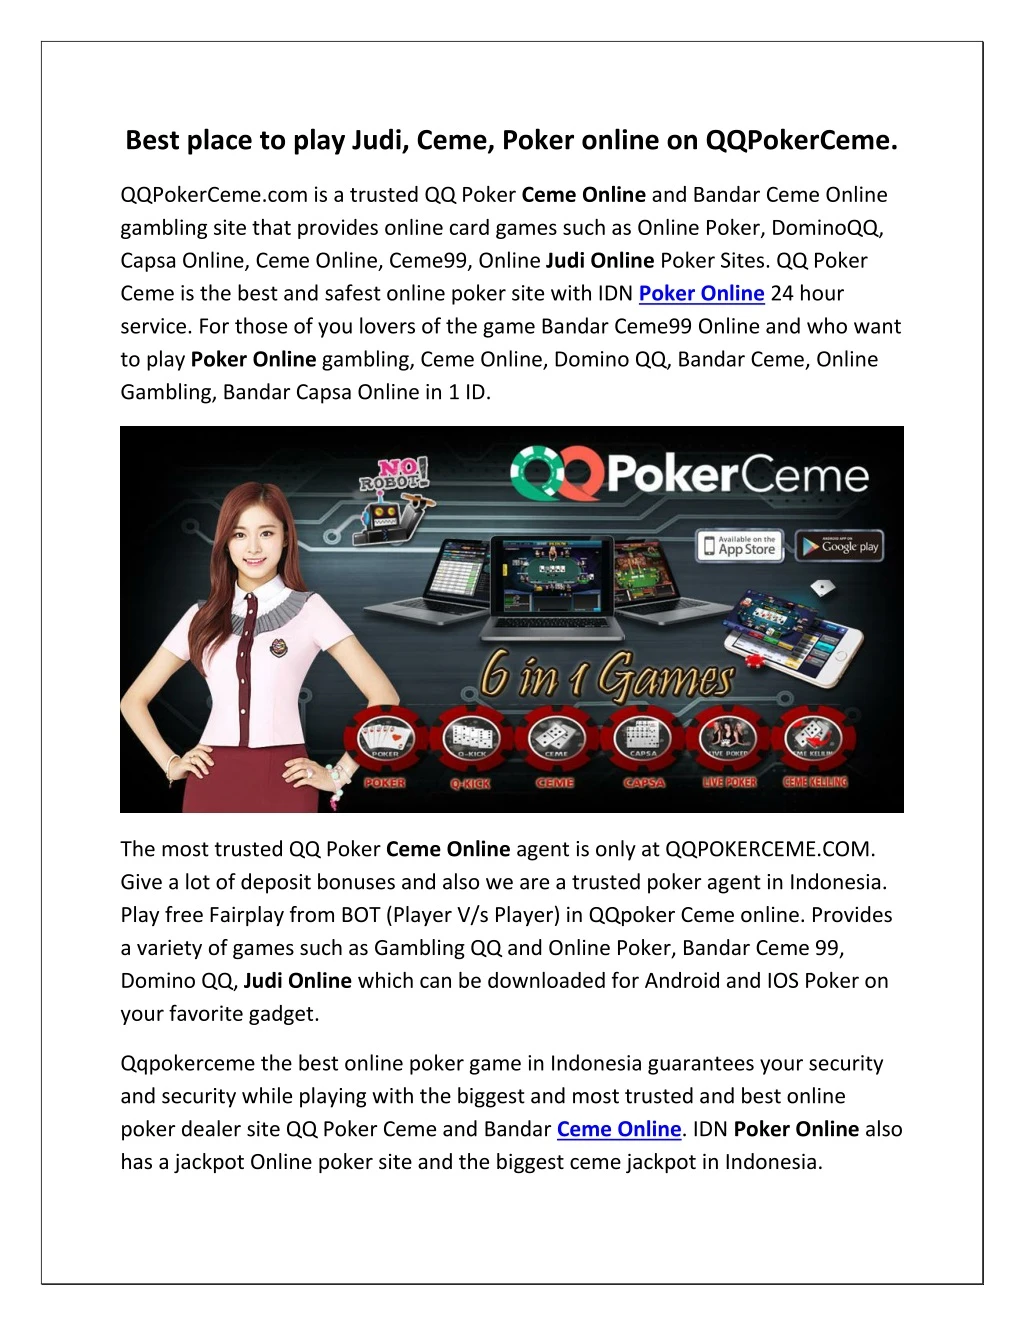 best place to play judi ceme poker online